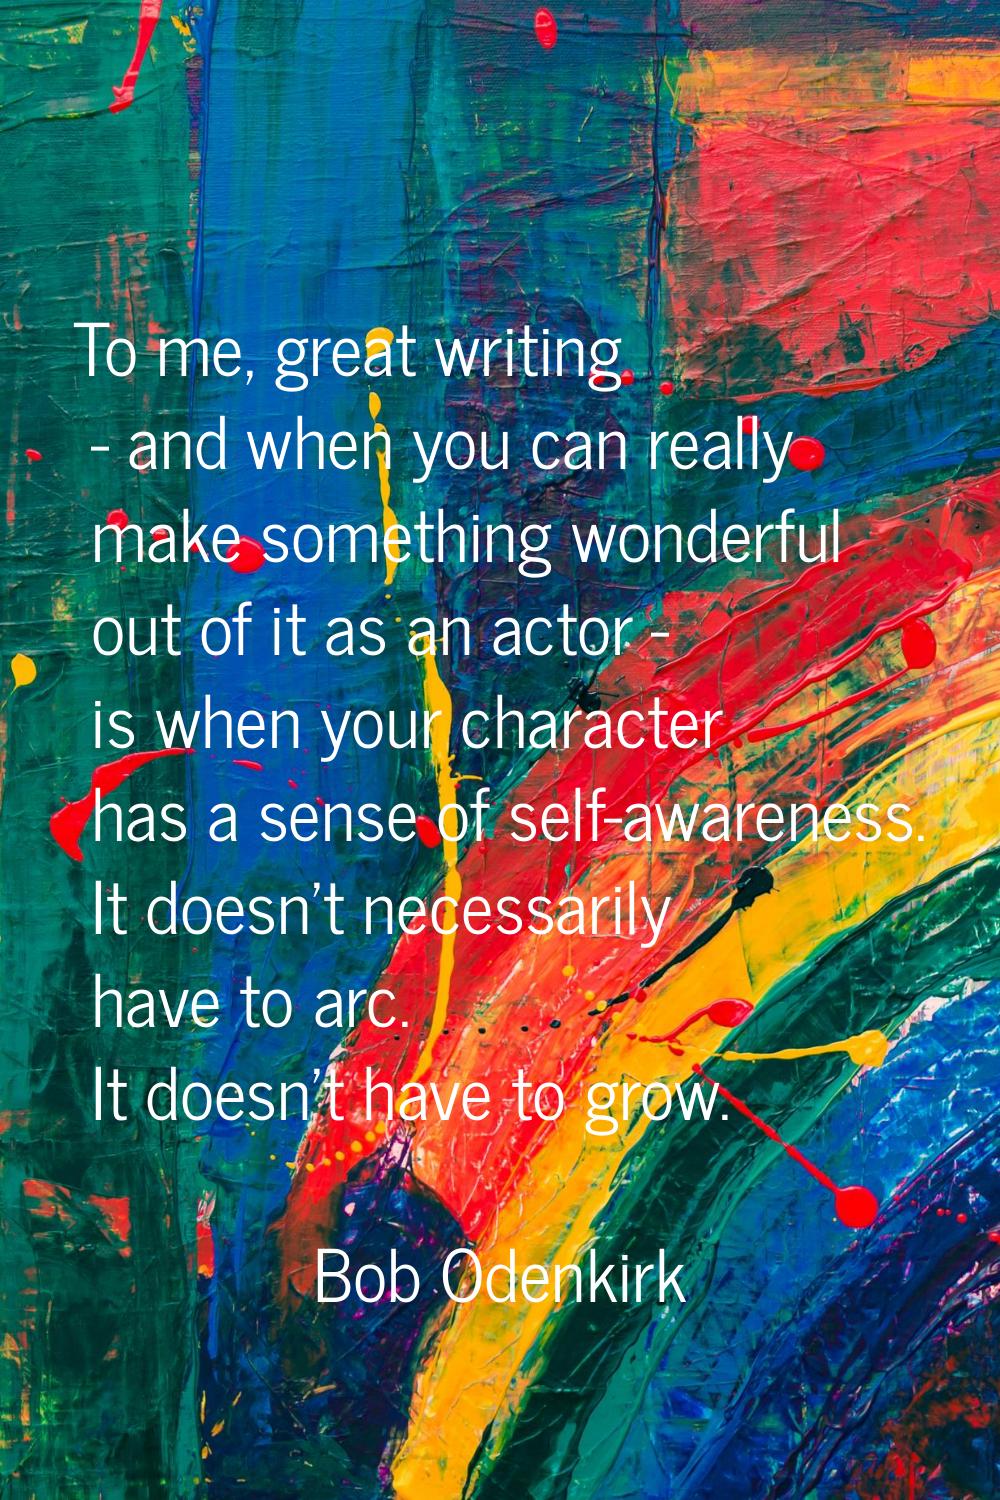 To me, great writing - and when you can really make something wonderful out of it as an actor - is 